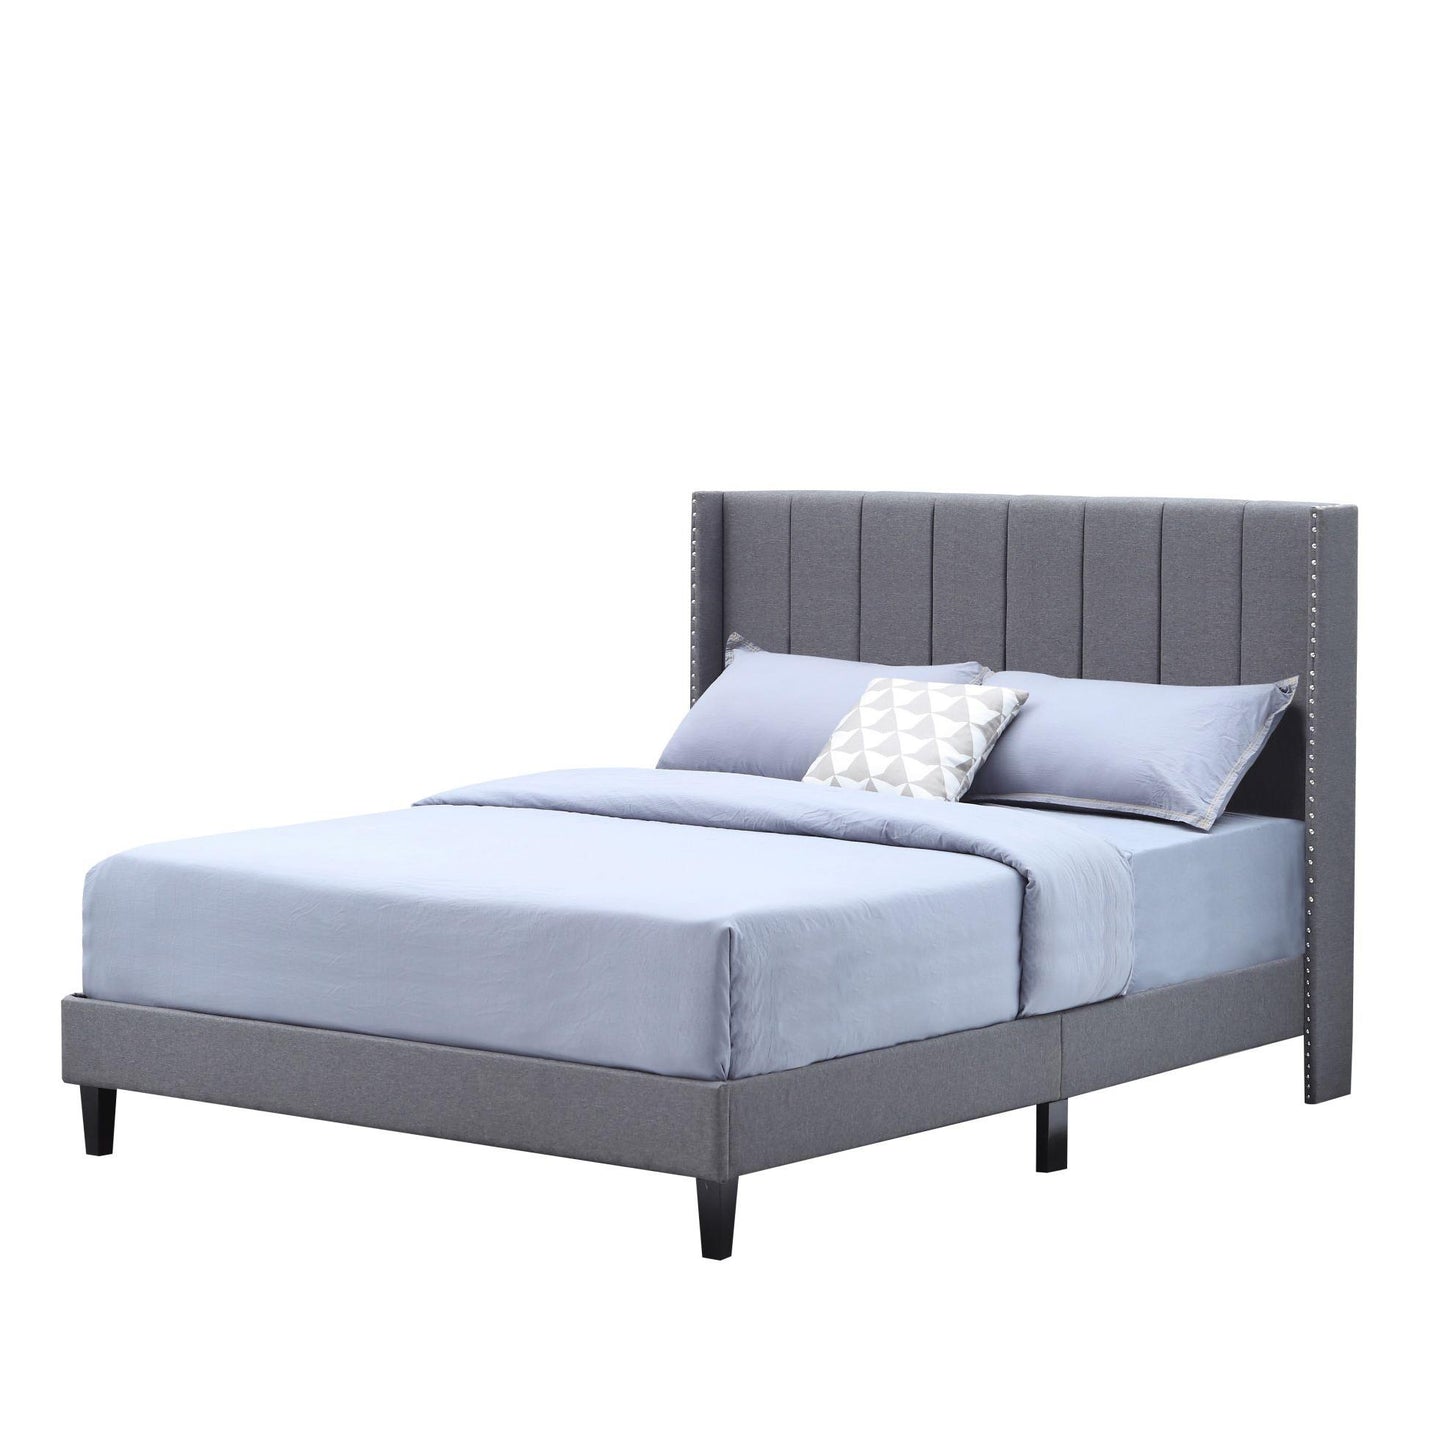 Juston Grey Upholstered Bed